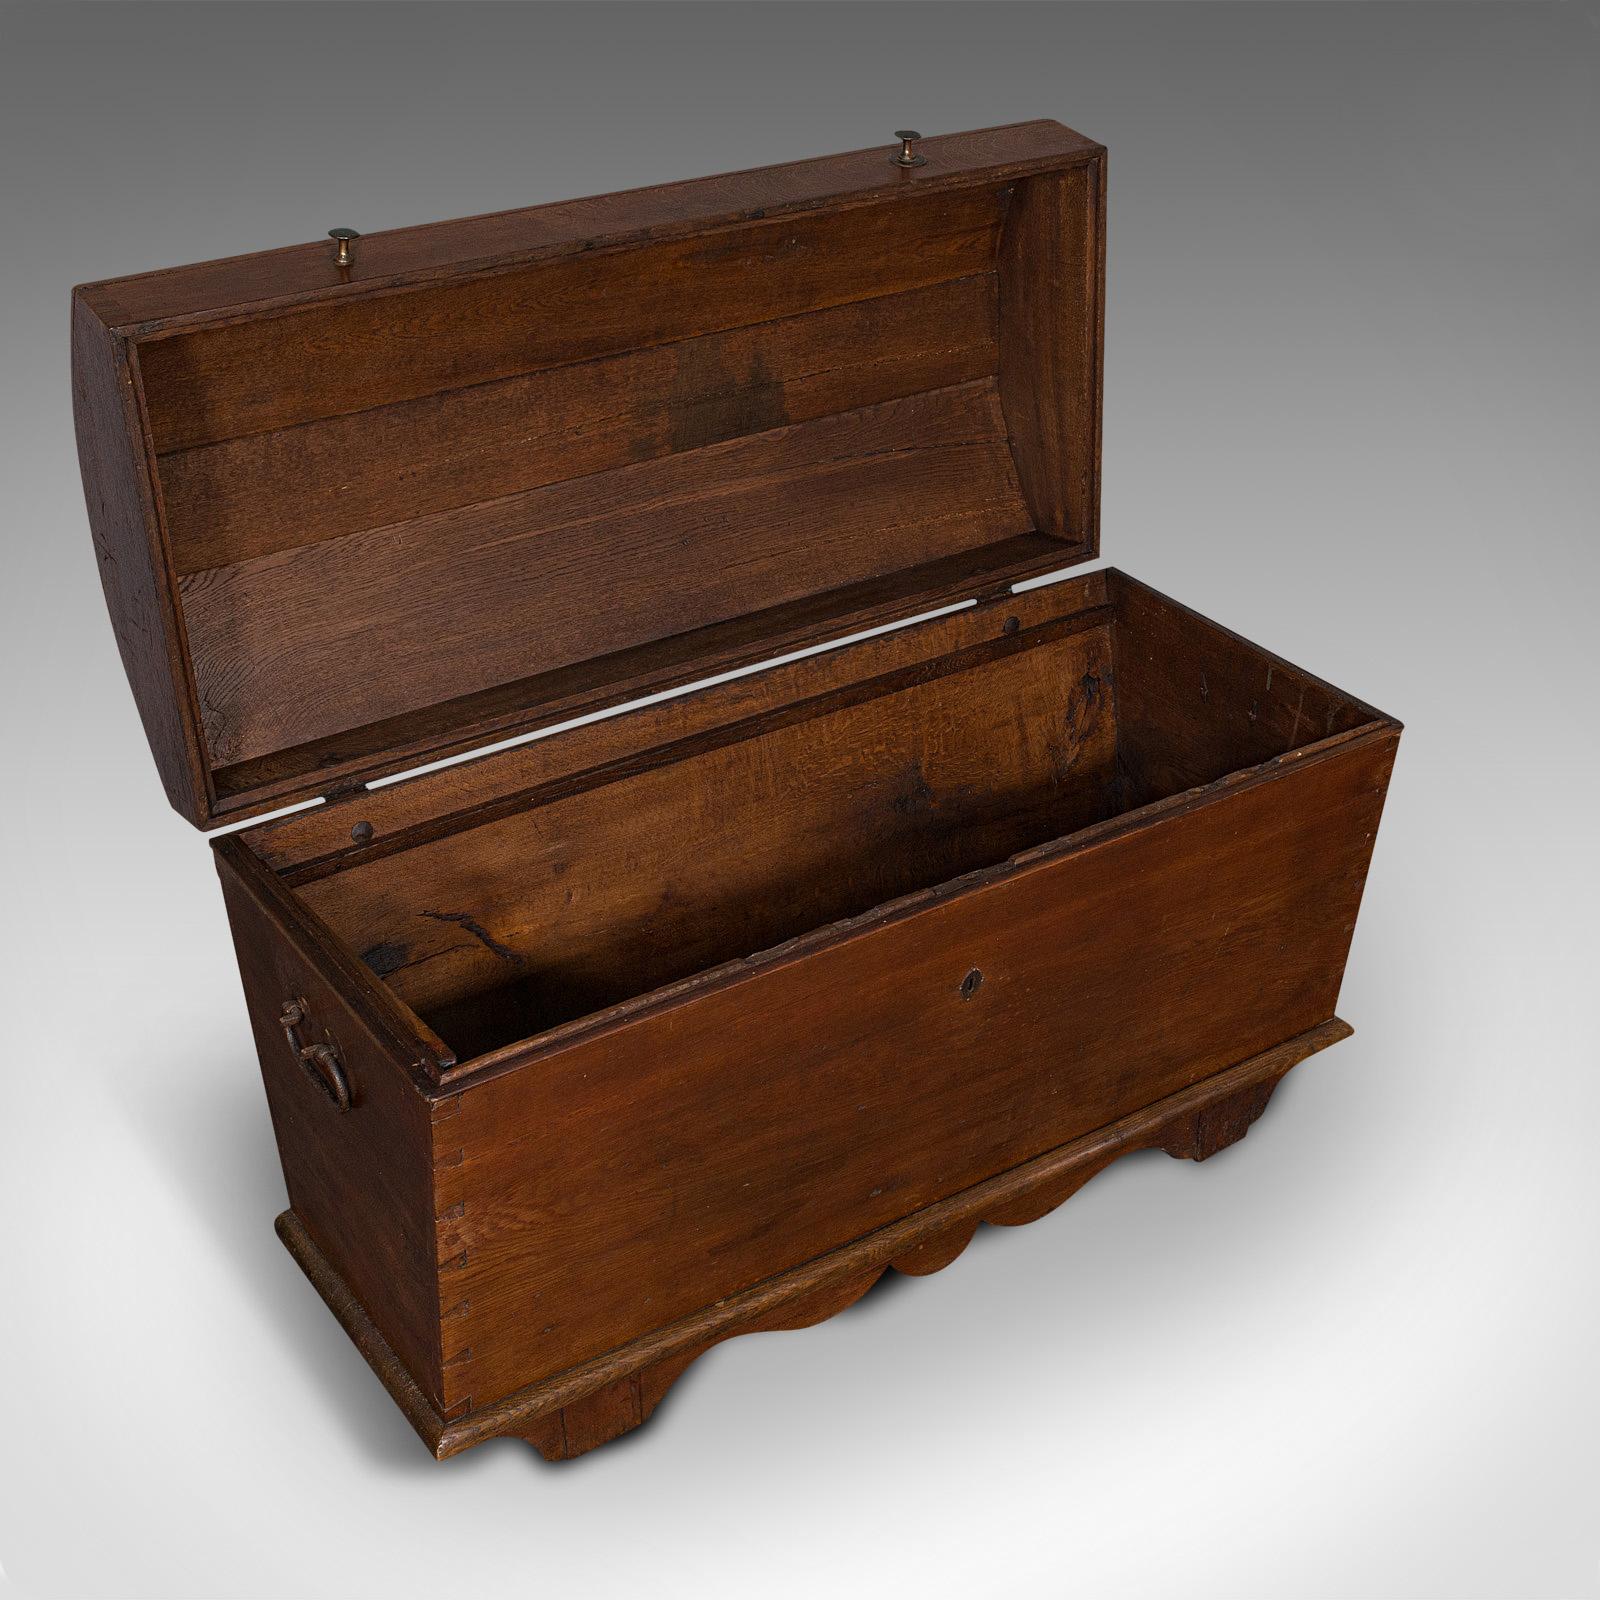 Large Antique Shipping Chest, English, Oak, Carriage Trunk, Georgian, circa 1800 For Sale 3